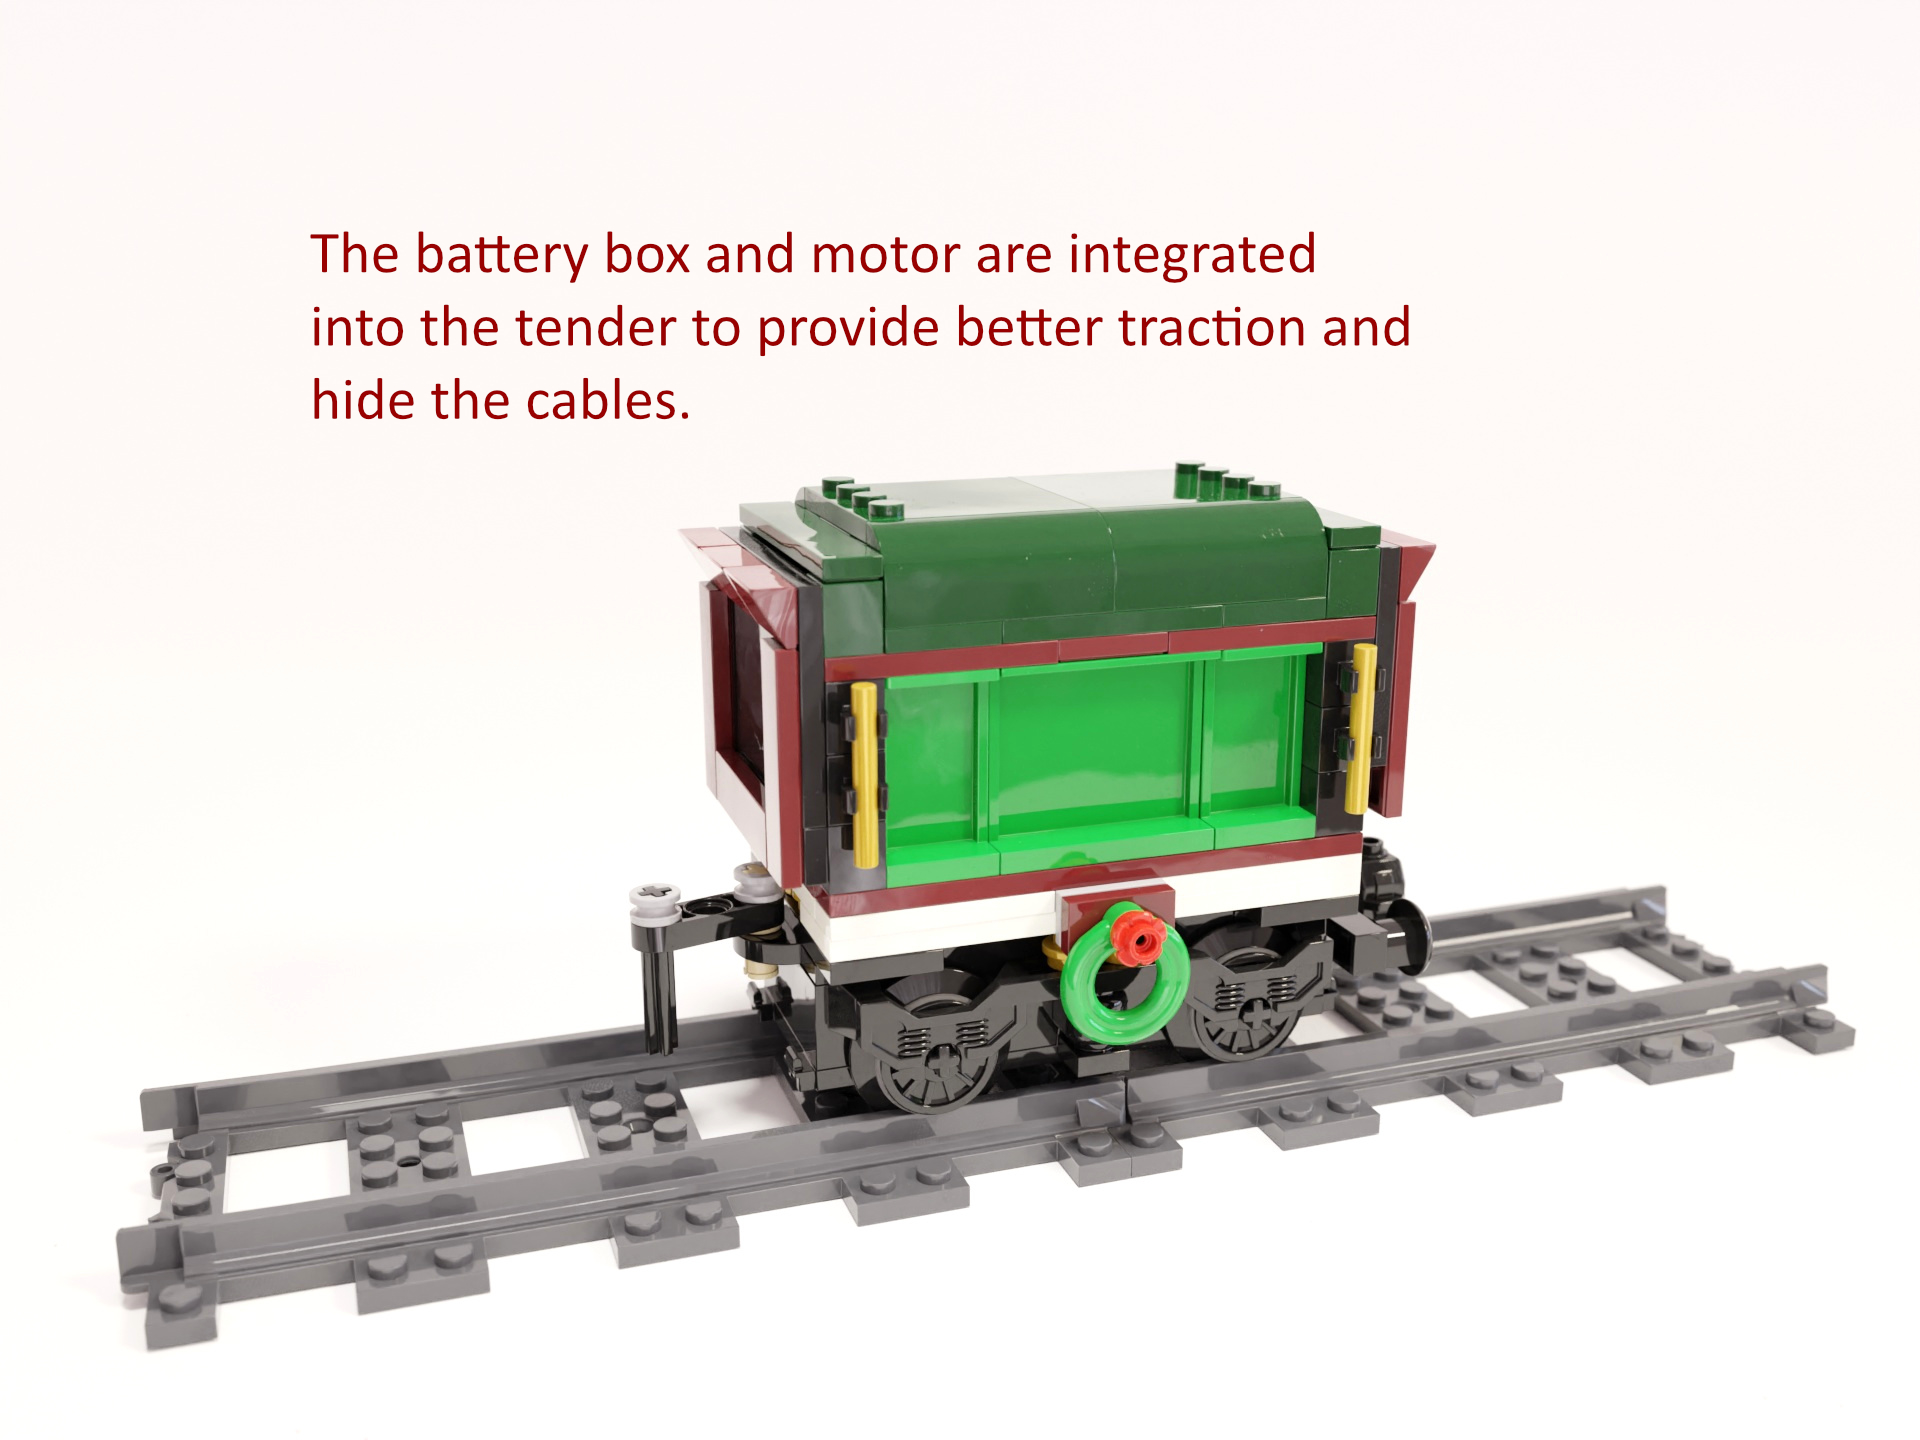 Picture 2: The battery box and motor are integrated into the tender to provide better traction and hide the cables